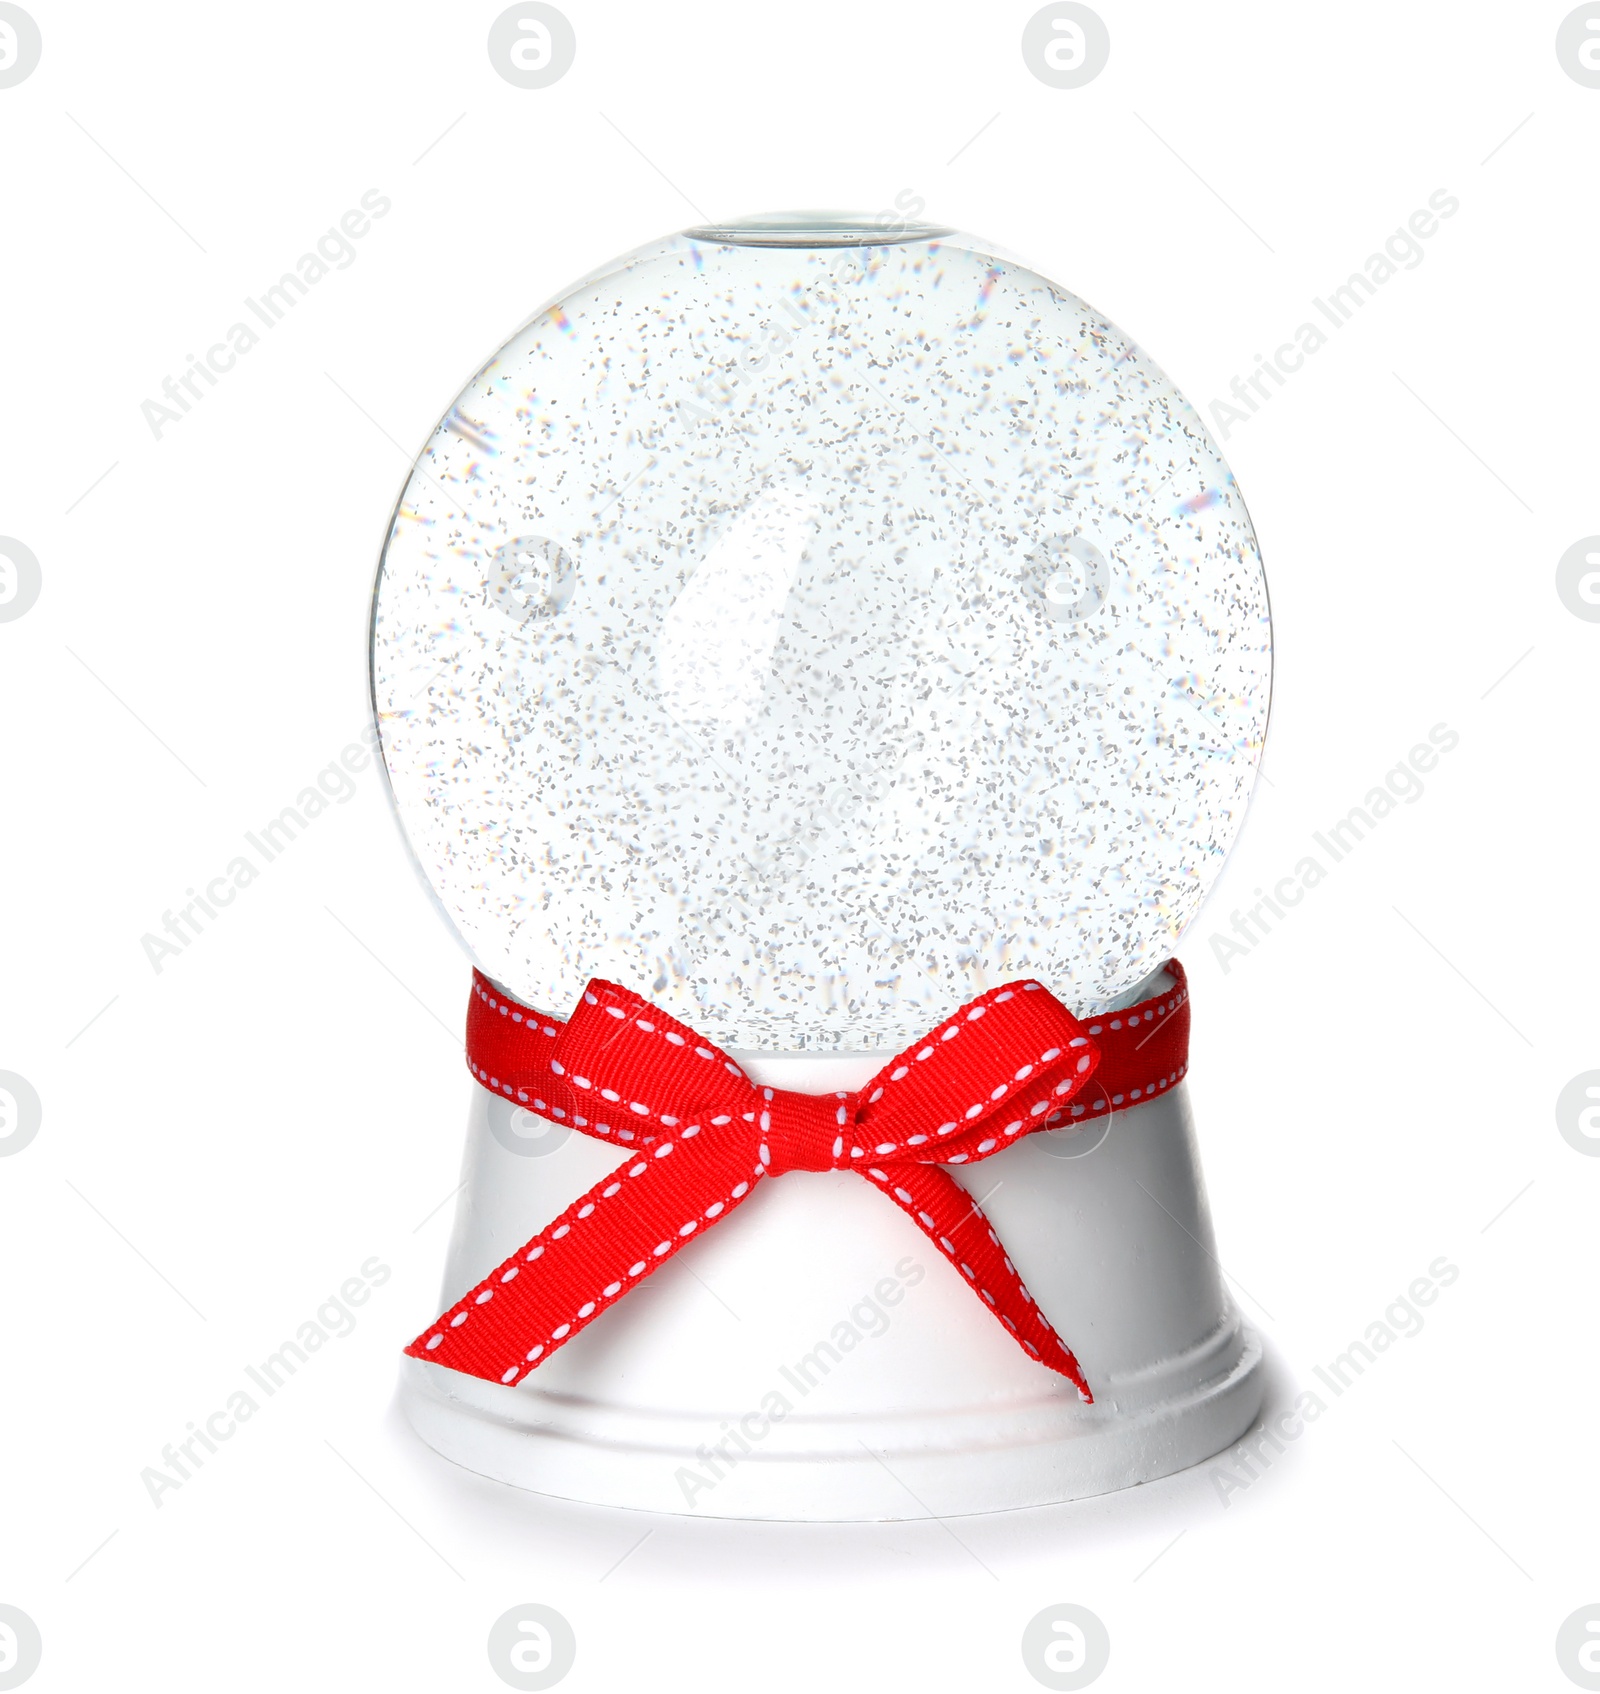 Photo of Magical empty snow globe with red bow isolated on white